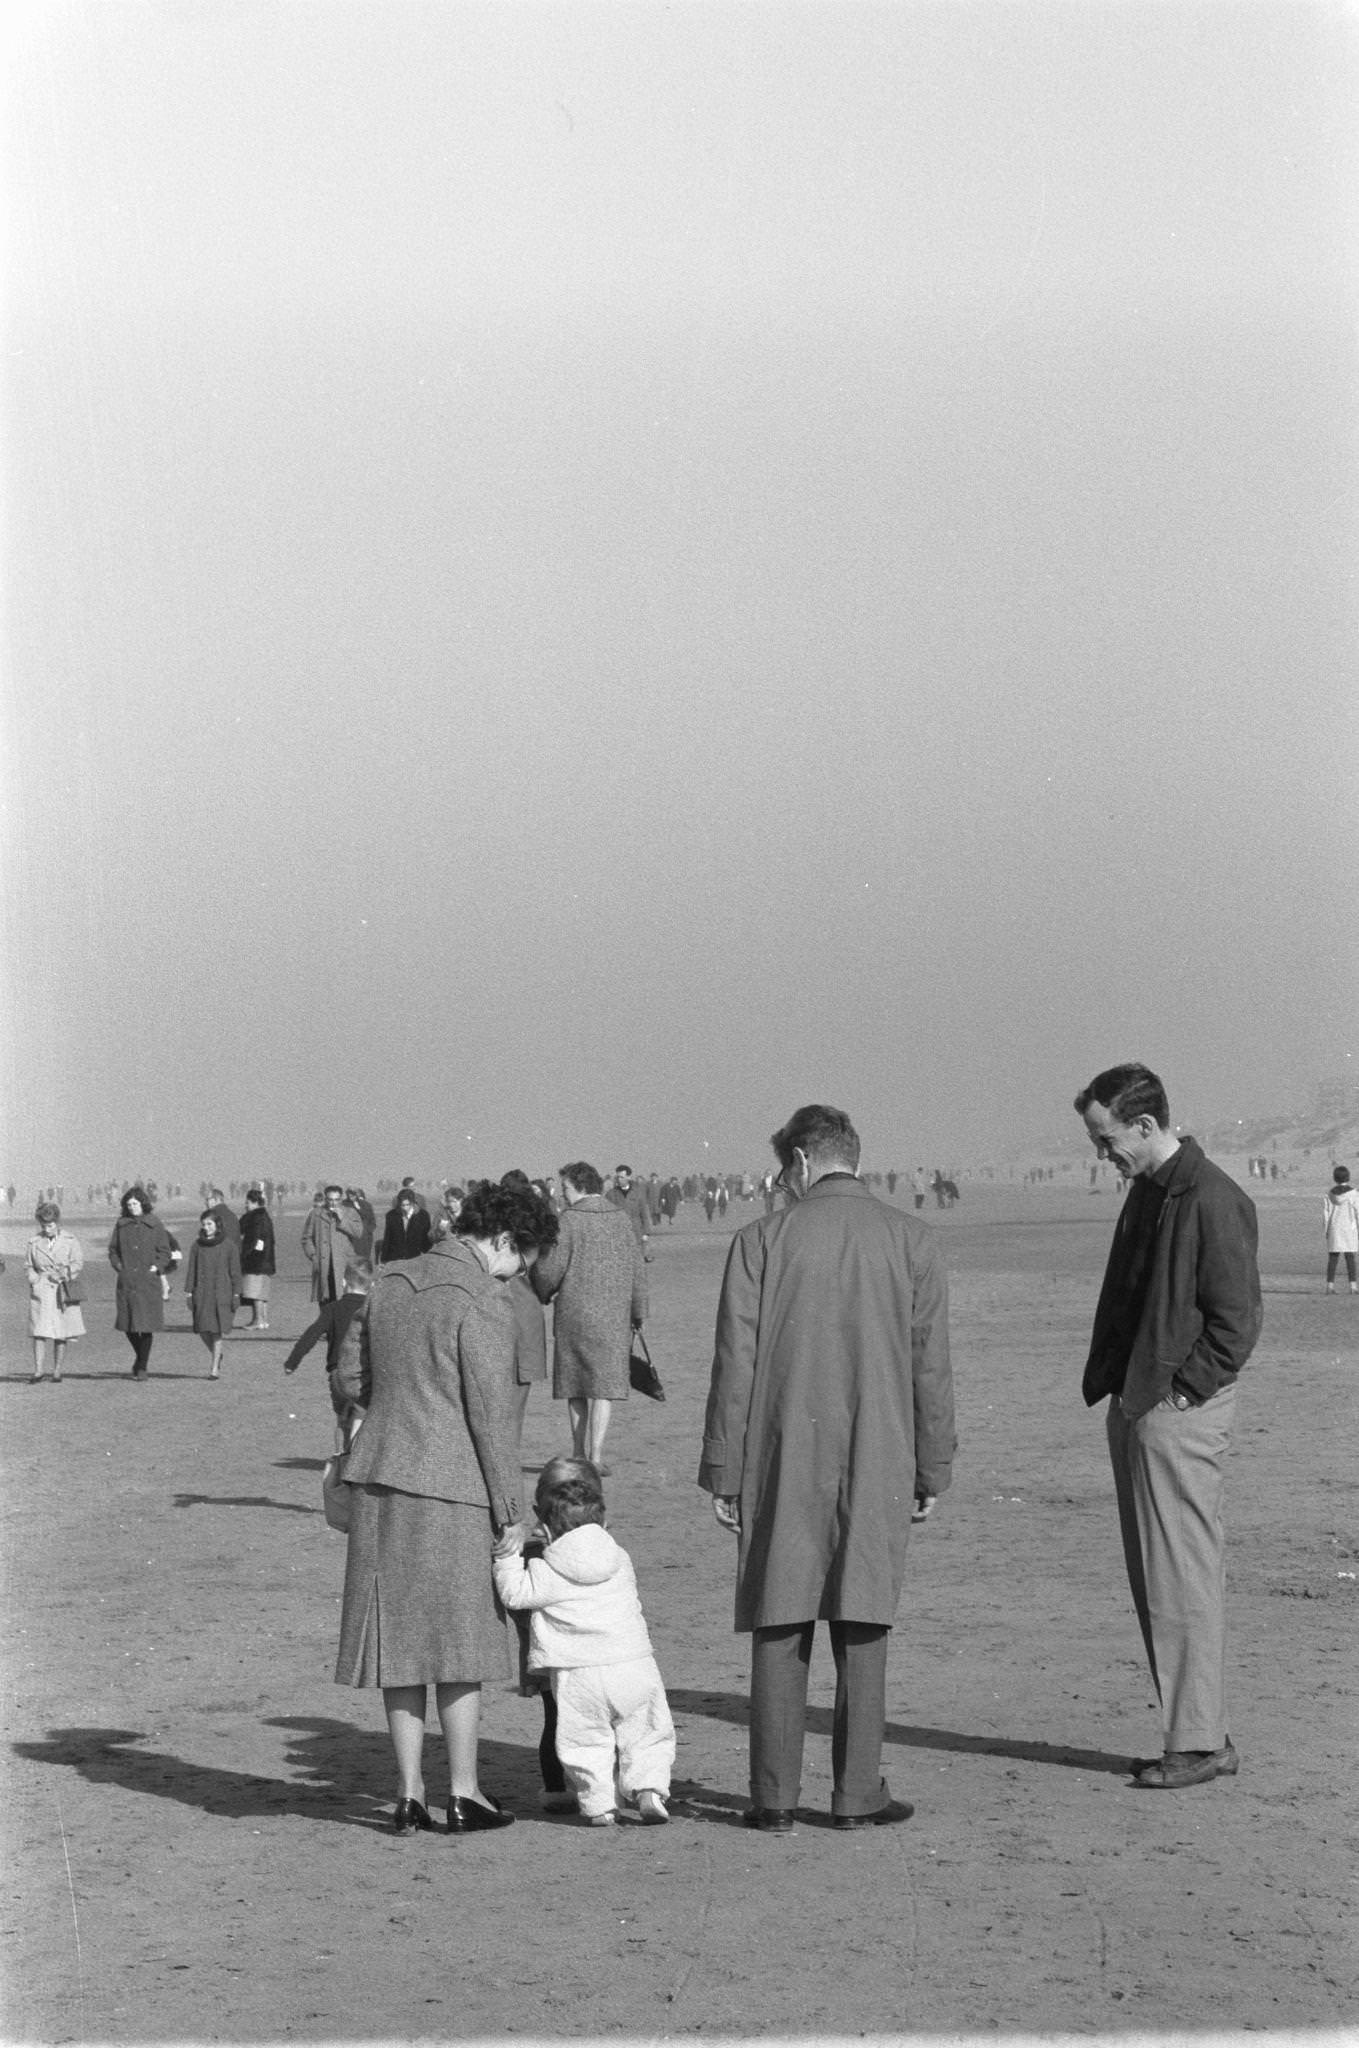 Beautiful spring weather on the beach at Zandvoort, February 20, 1961, beaches, spring weather, The Netherlands.